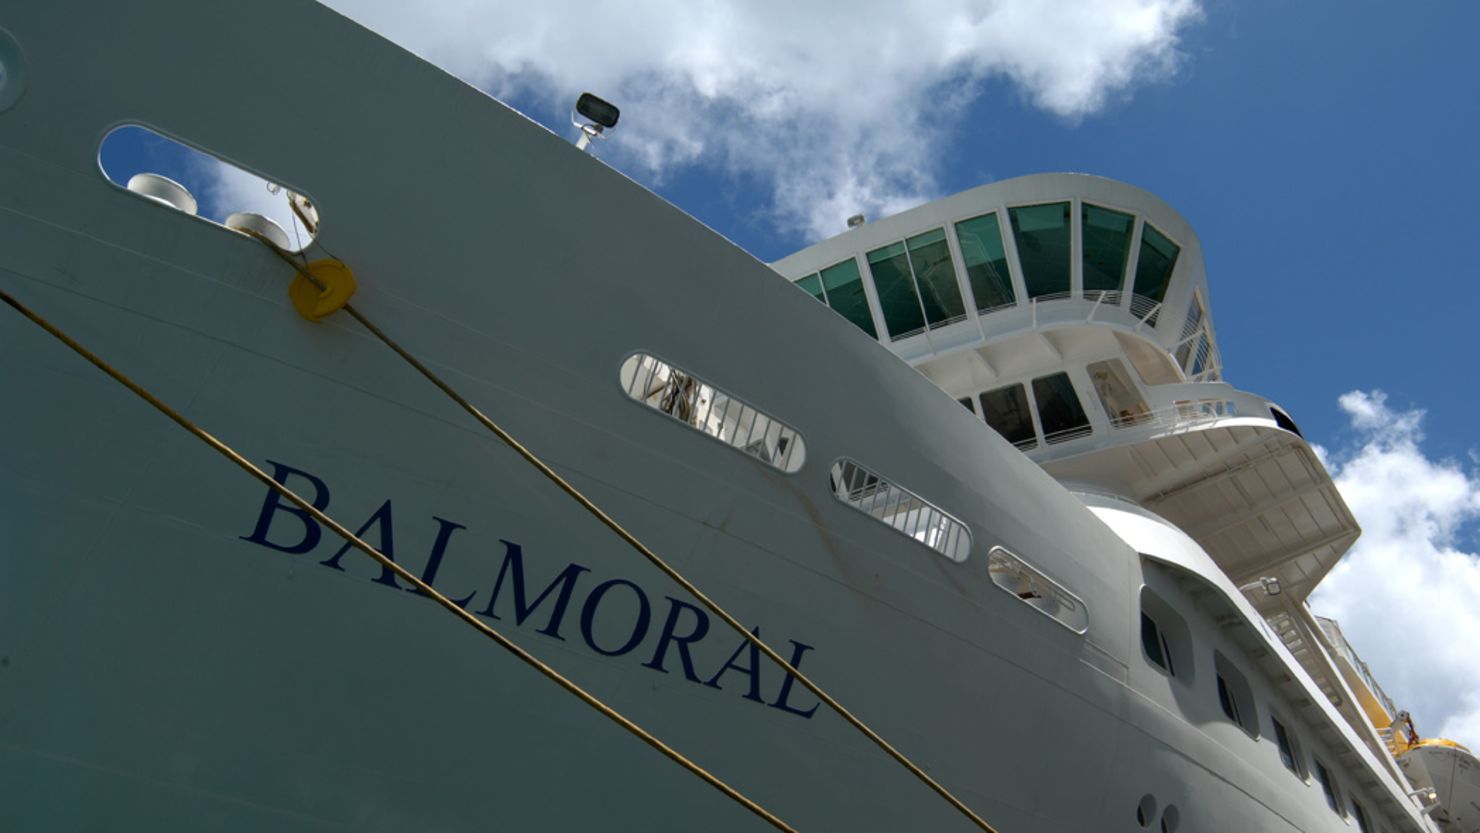 The MS Balmoral is hosting a memorial cruise to mark the 100th anniversary of the Titanic's sinking.